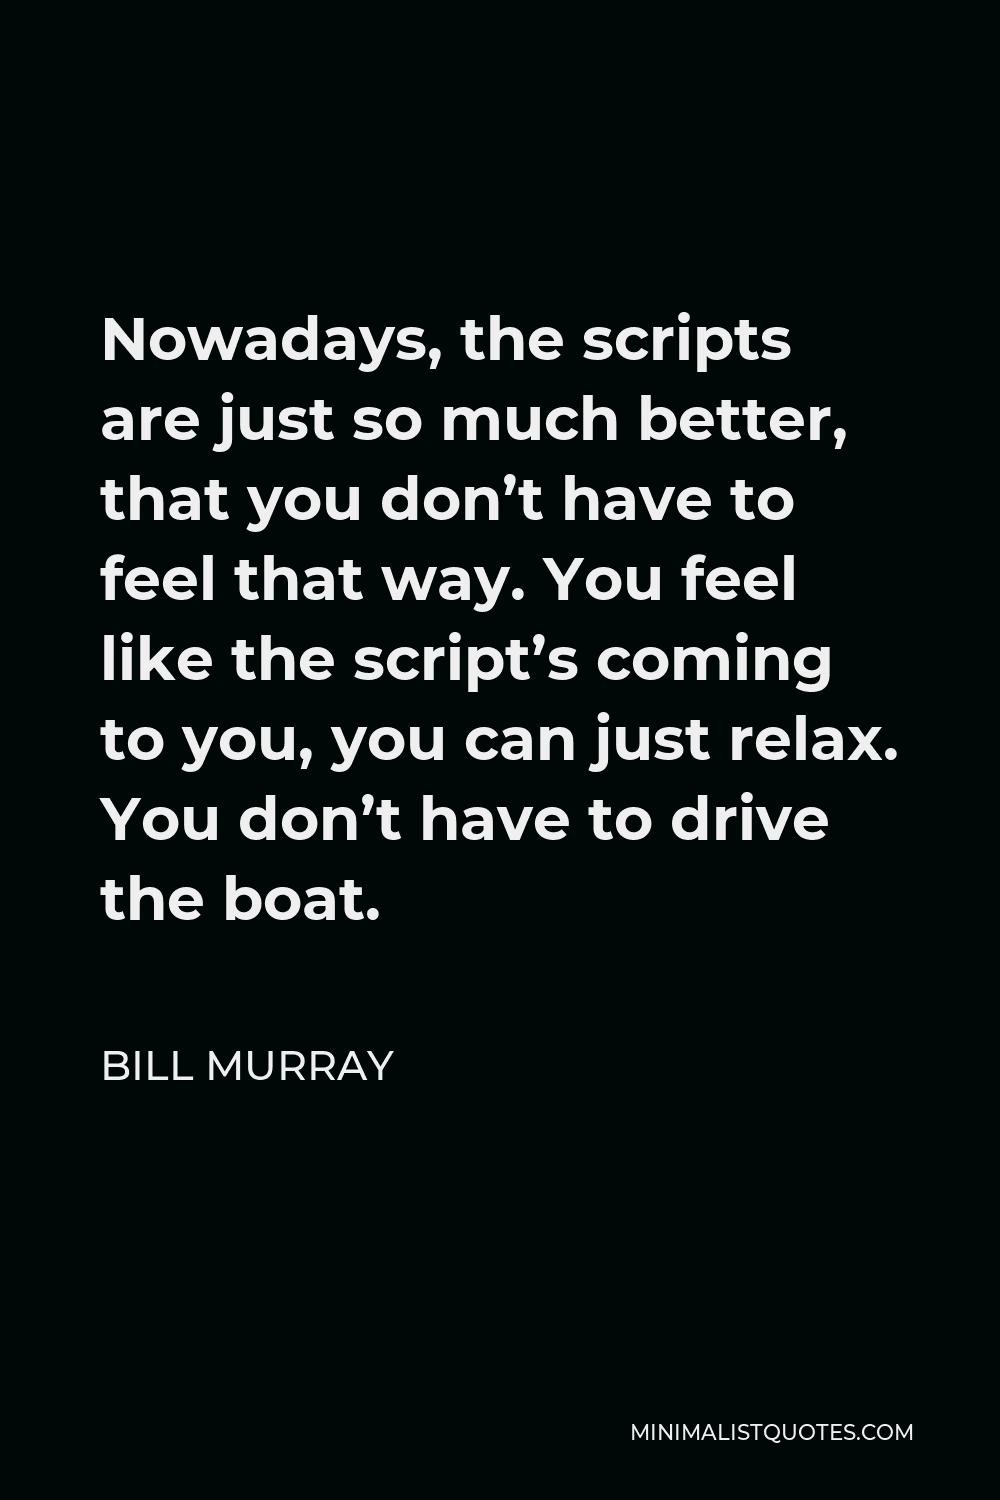 Bill Murray Quote - Nowadays, the scripts are just so much better, that you don’t have to feel that way. You feel like the script’s coming to you, you can just relax. You don’t have to drive the boat.